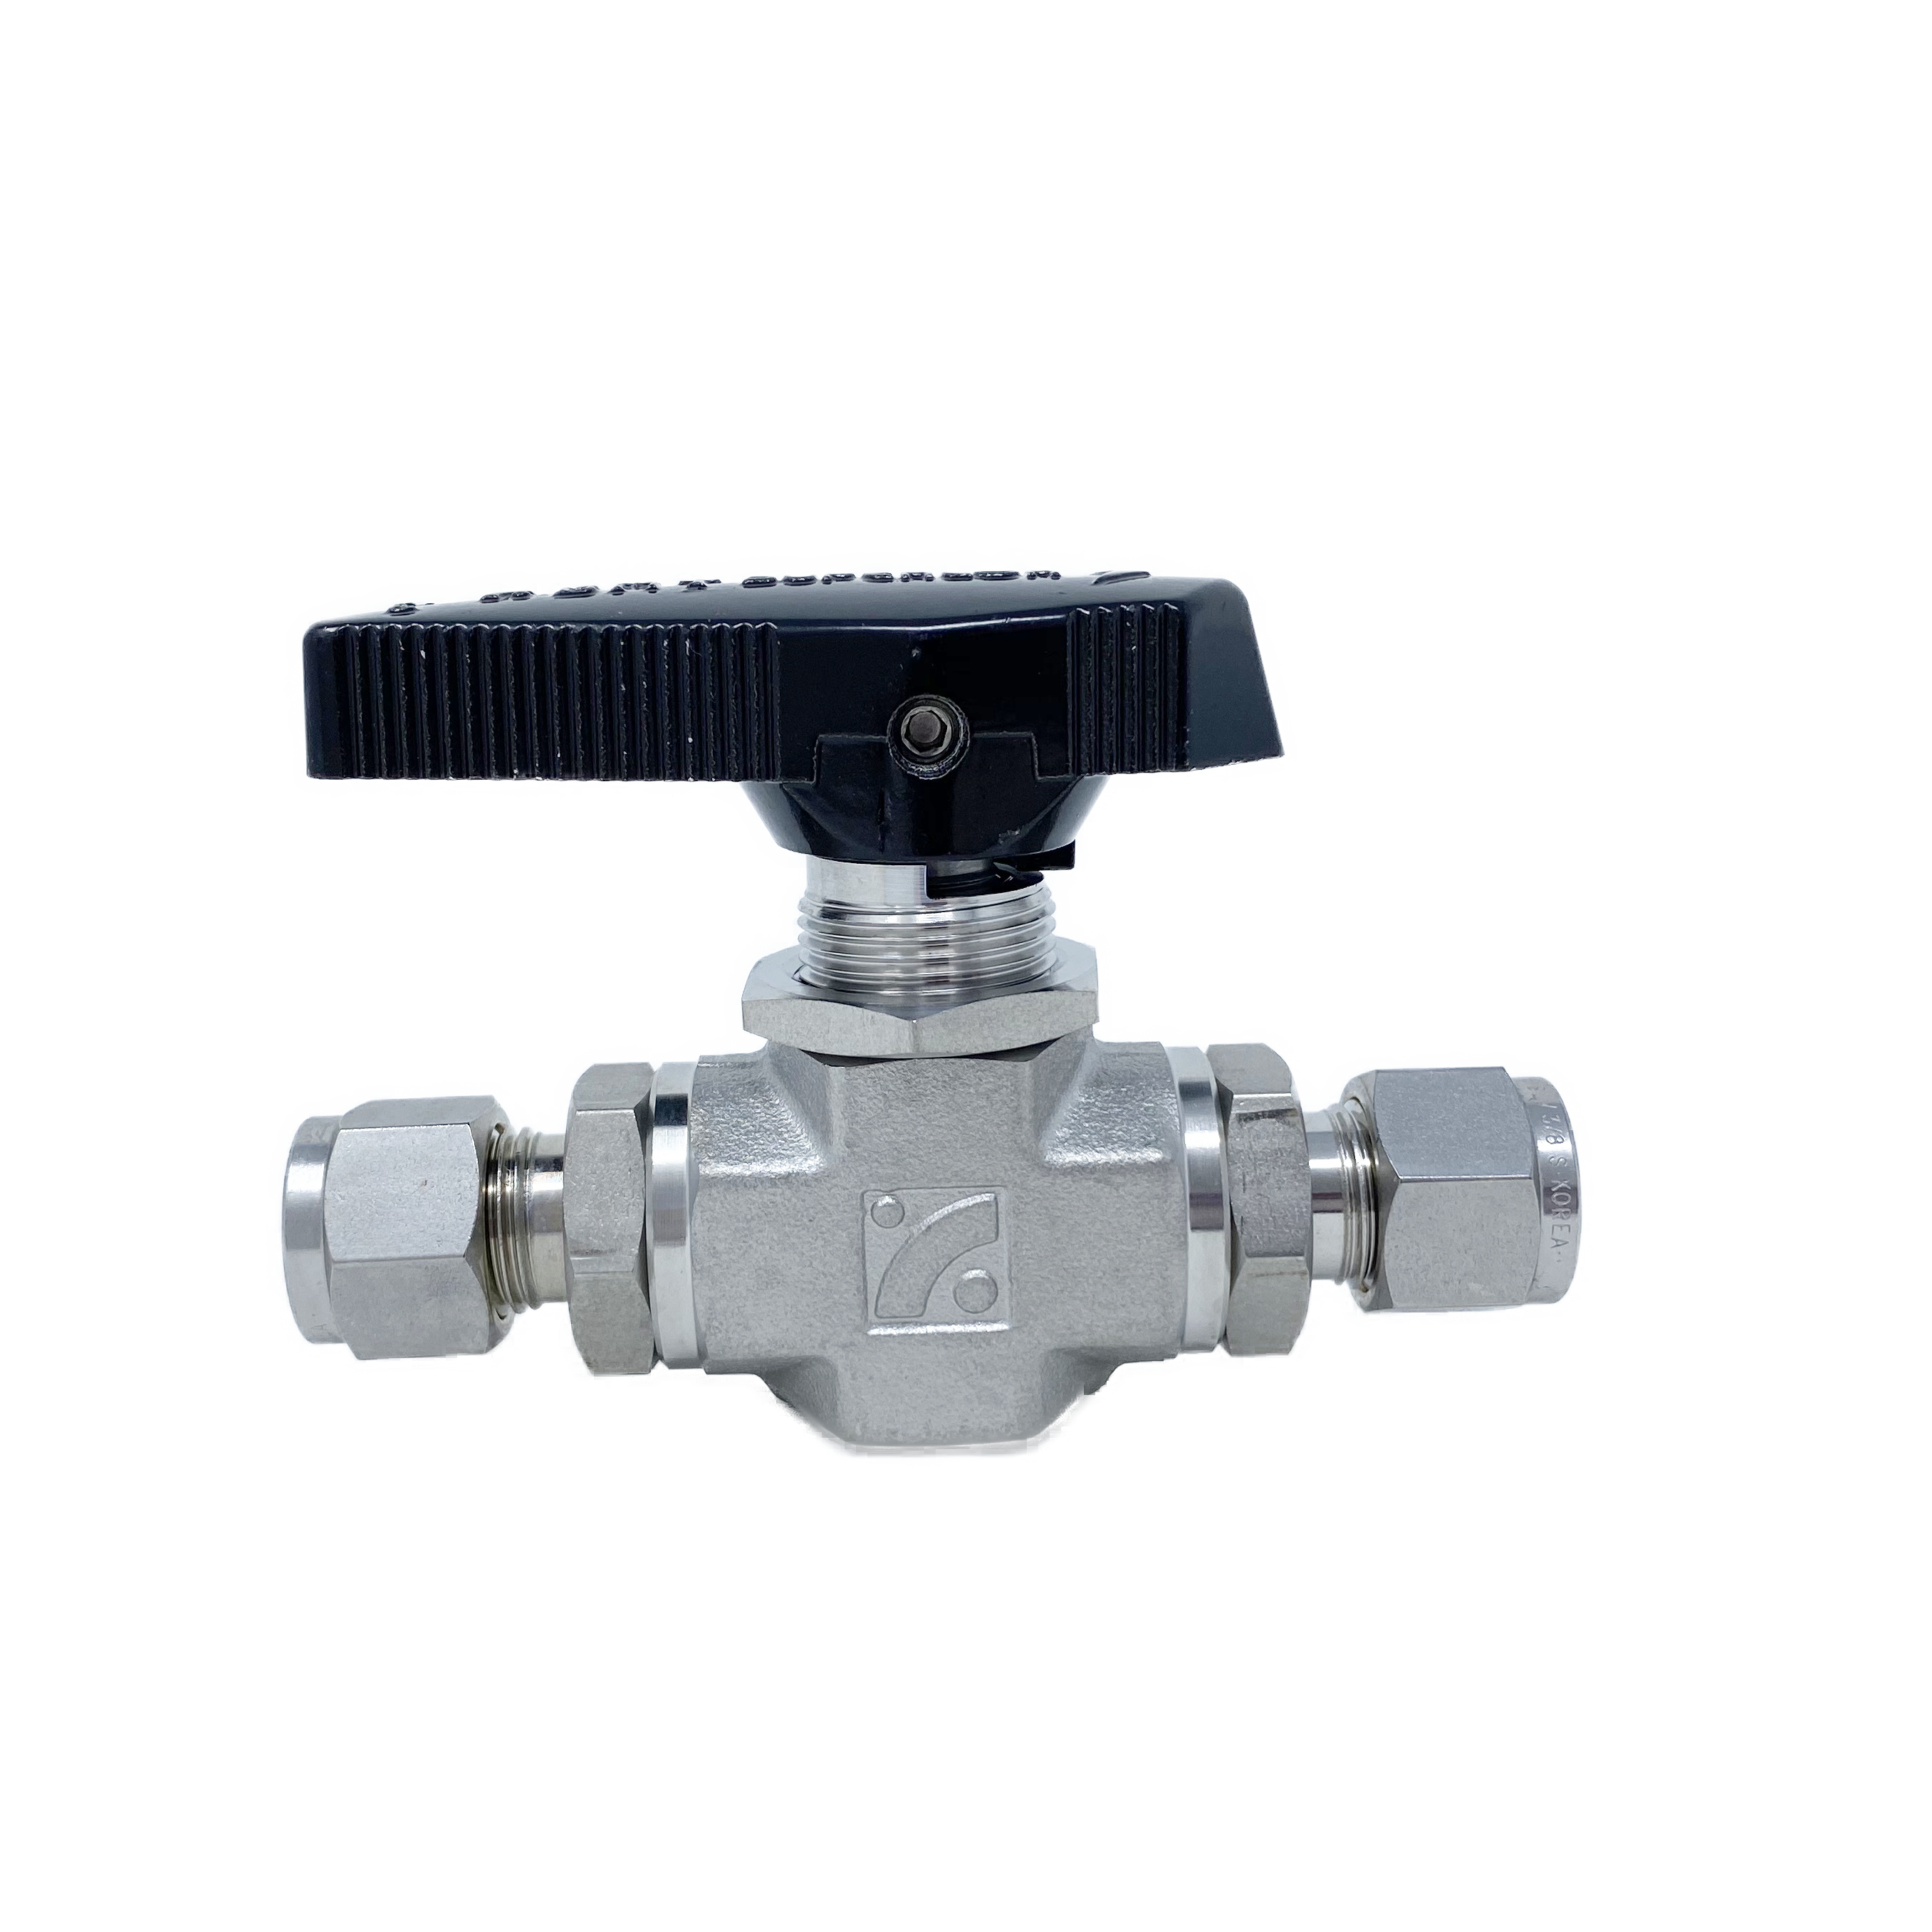 SBVF3602-S-6-MR : Superlok Ball Valve, Forged High Pressure, 3/8" Tube O.D, NACE Rated, 6000psi, 316SS